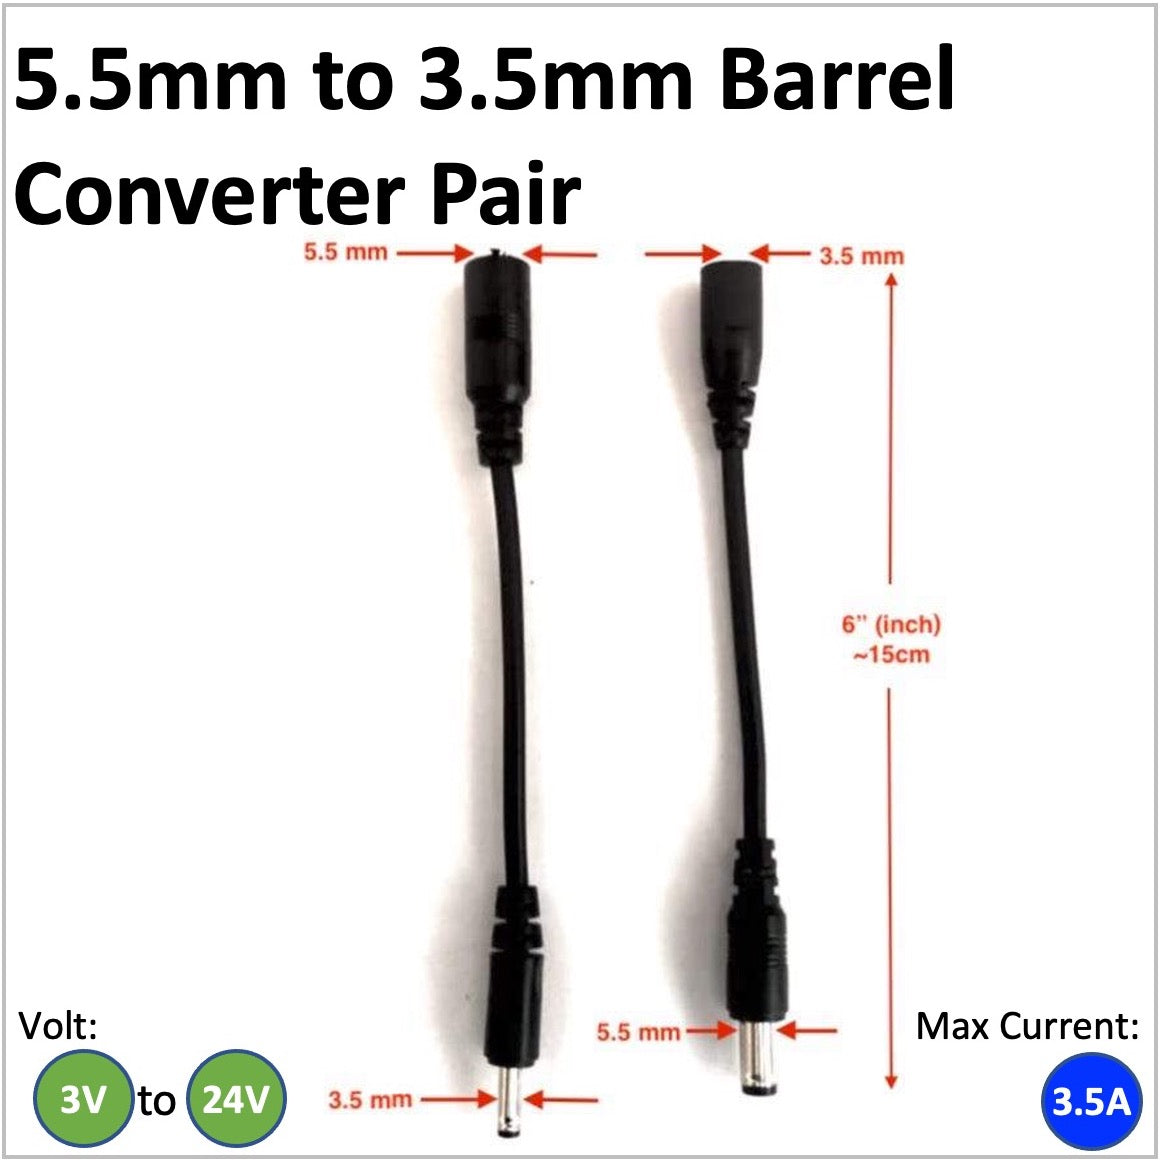 Pair of DC barrell converter cable with a 5.5mm connector leading to 3.5mm DC barrel adapter